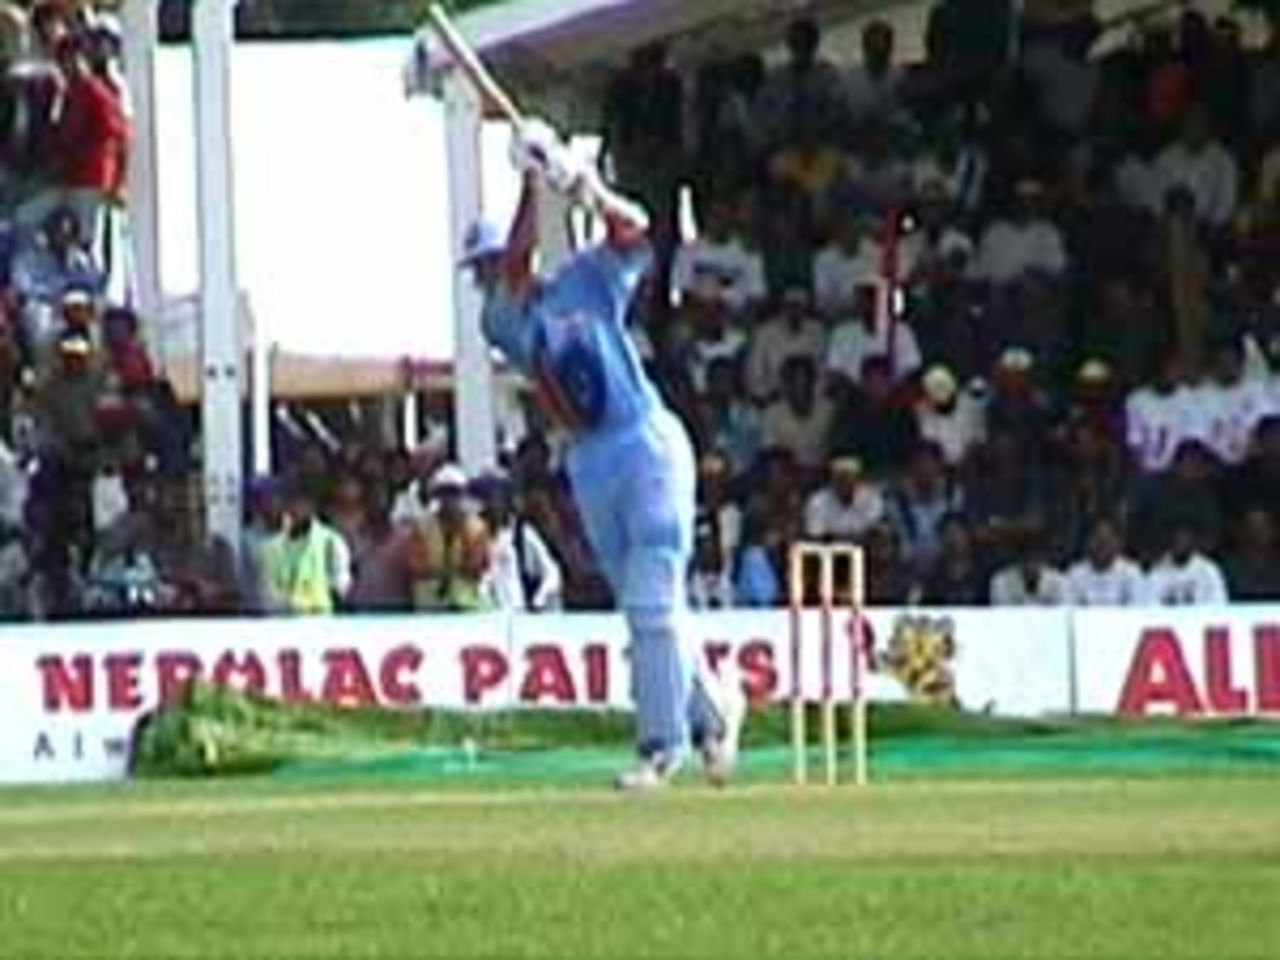 Dravid drives fluently down the ground, India v West Indies (3rd ODI), Coca-Cola Singapore Challenge, 1999-2000, Kallang Ground, Singapore, 5 Sep 1999.